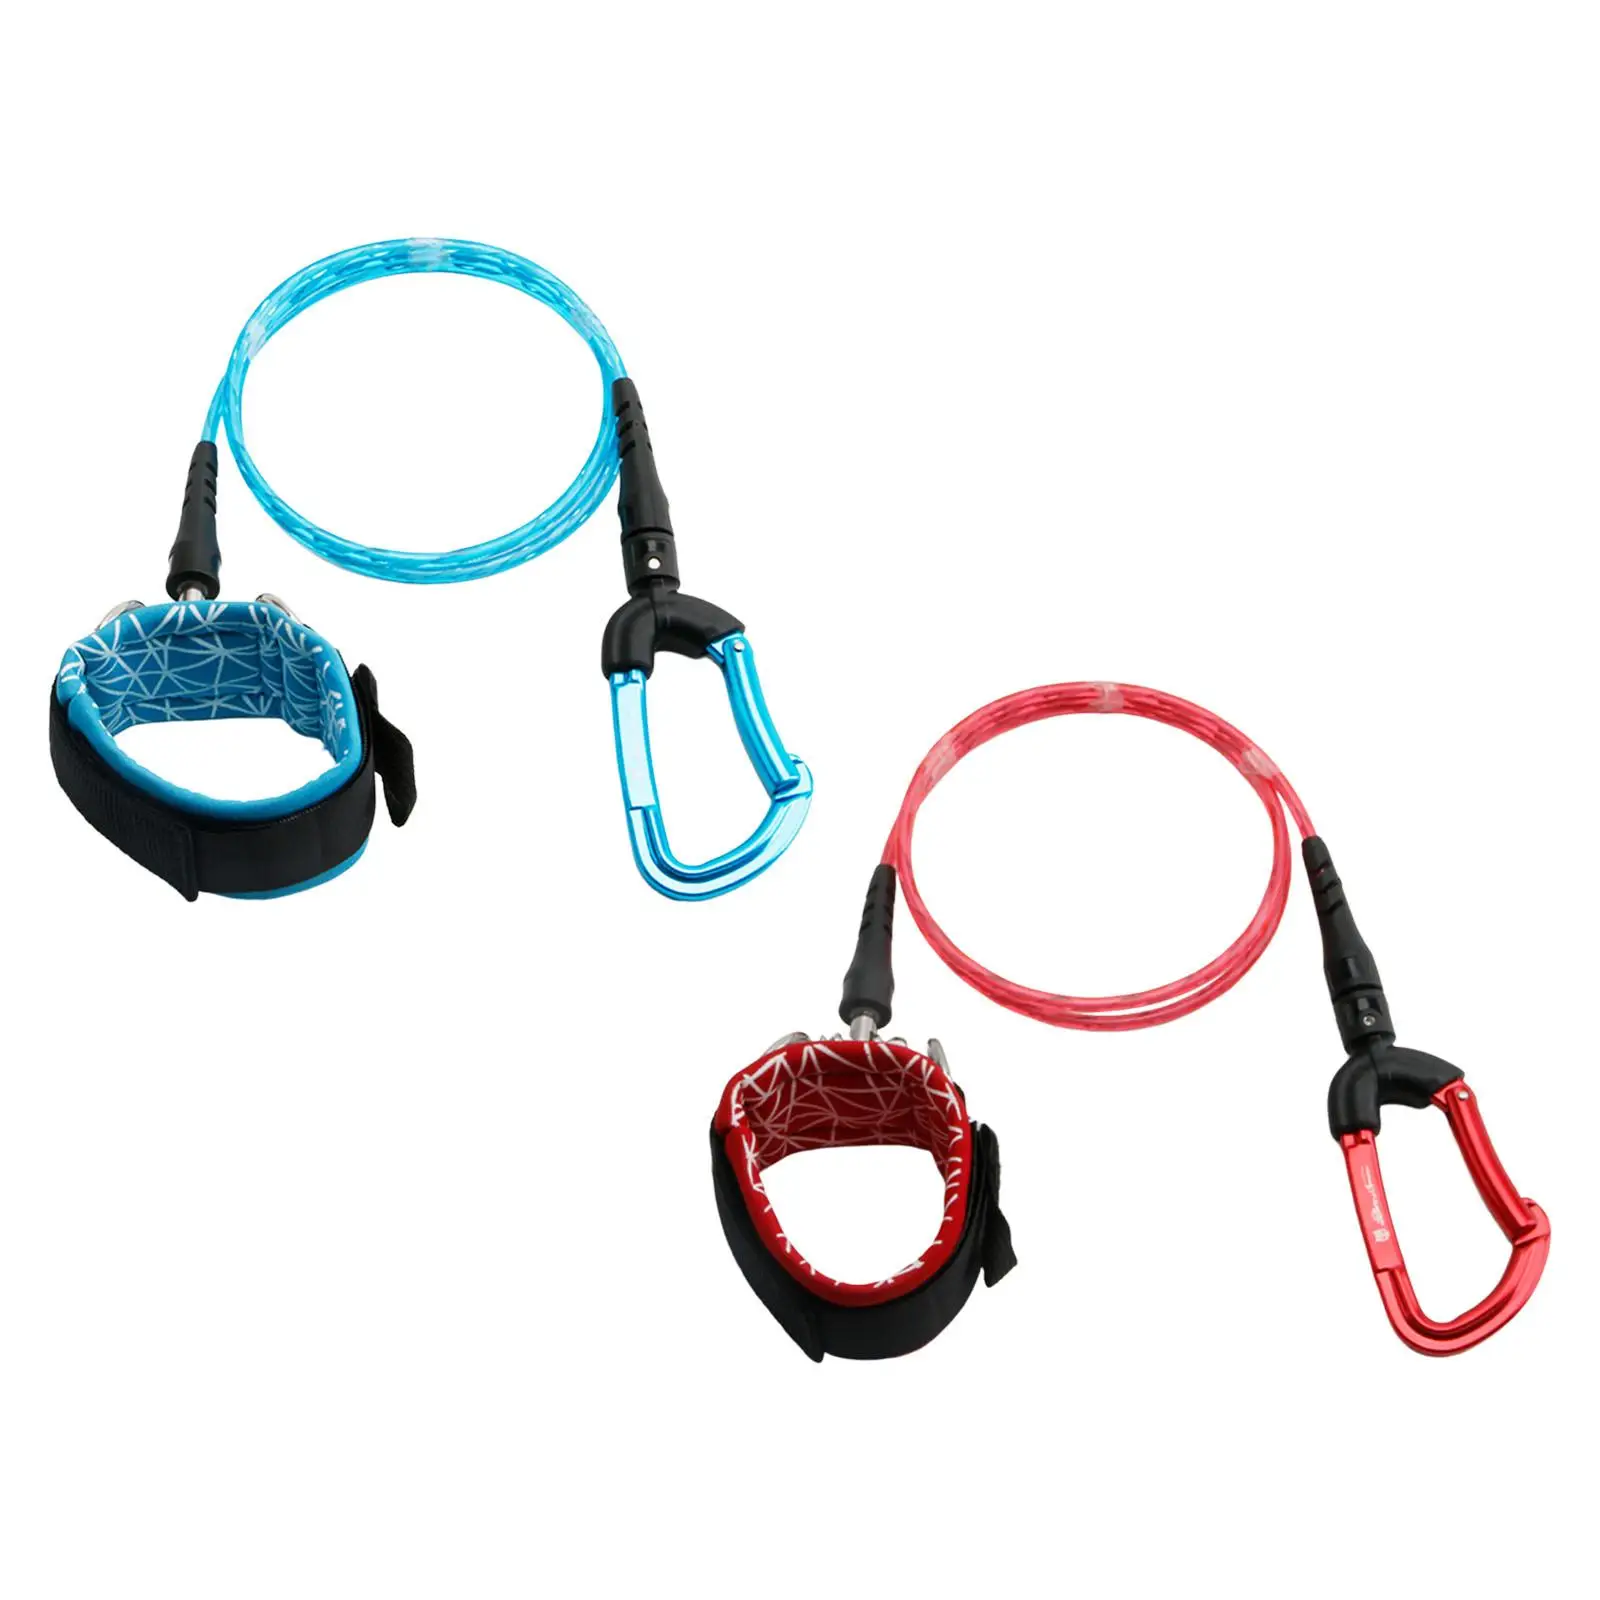 Freediving Lanyard Adjustable Breaking Force 24kN with Dive Wristband for Drift Diving Underwater Sports Freediving